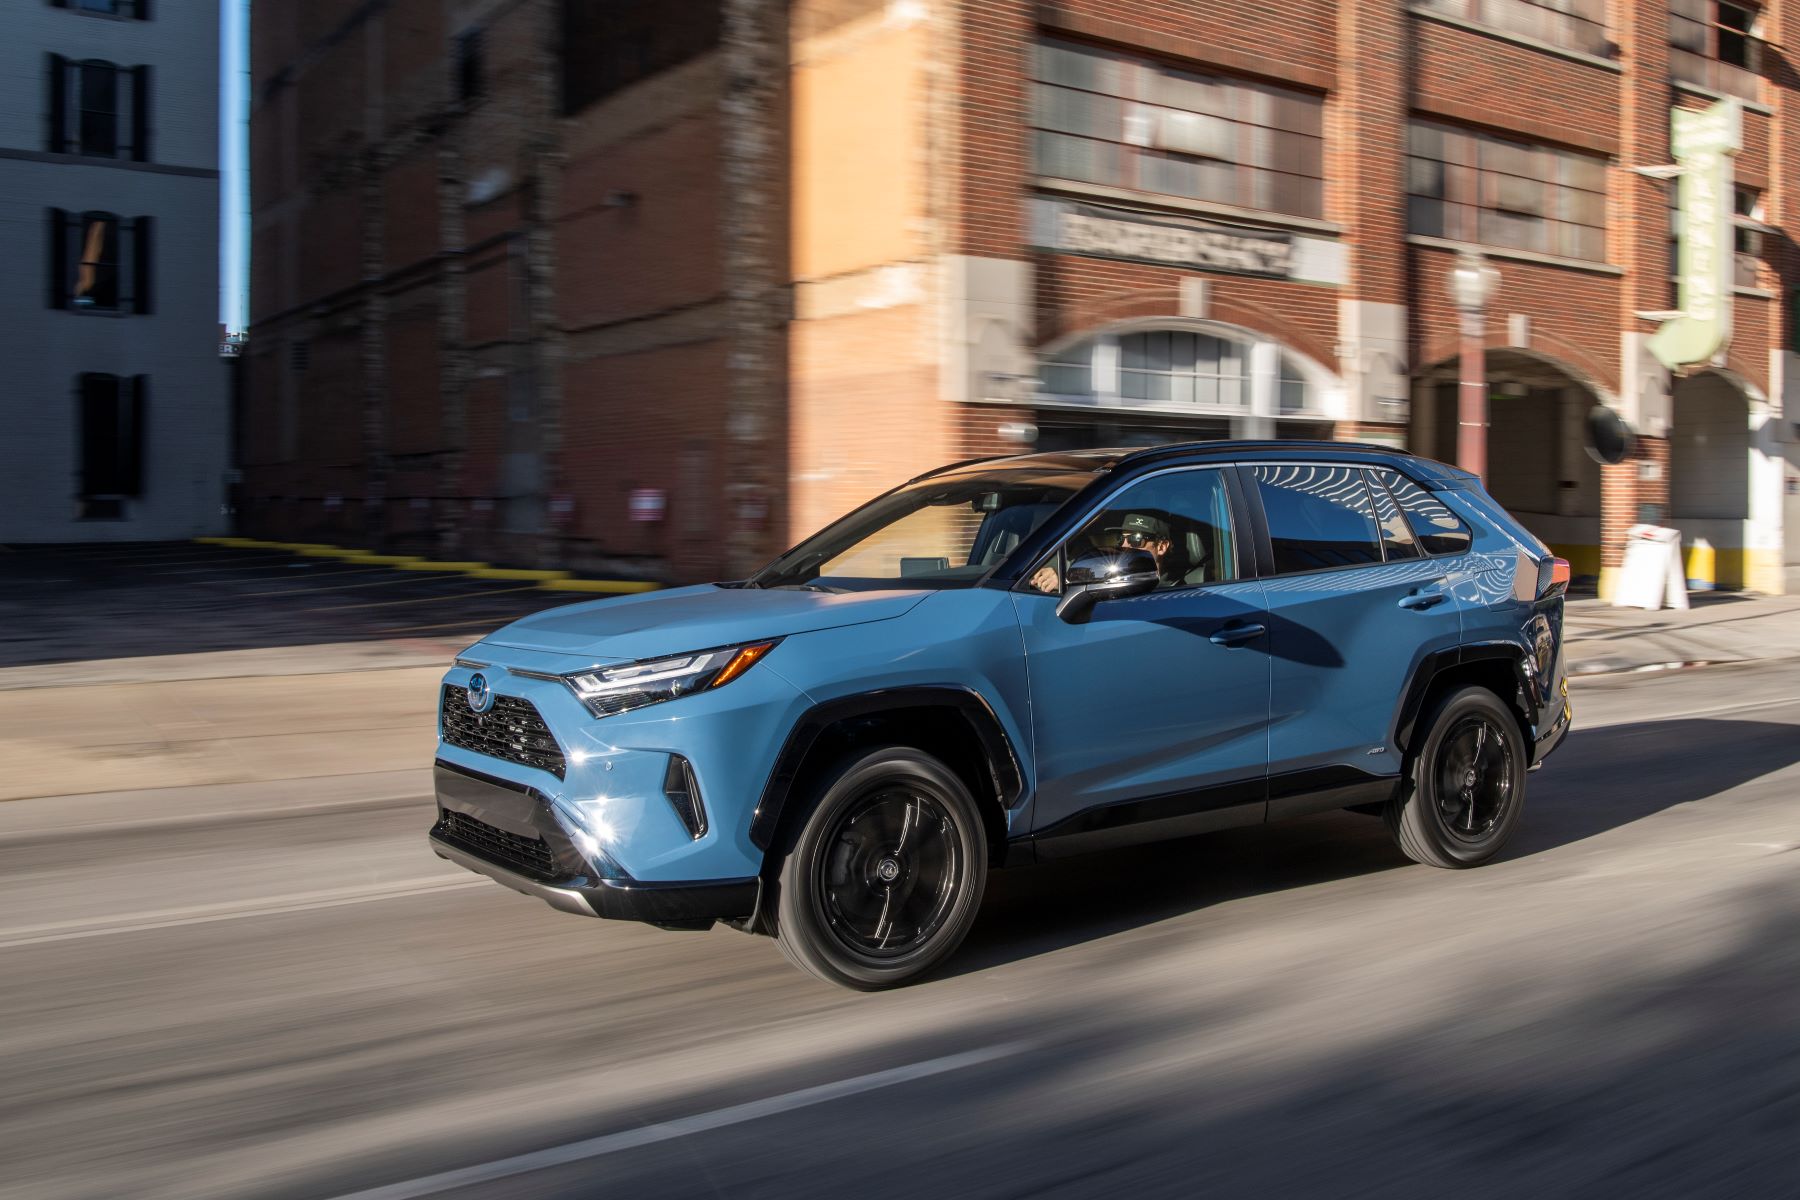 Toyota RAV4 problems are mostly absent from its most recent model year, with the pictured 2022 Toyota RAV4 XSE